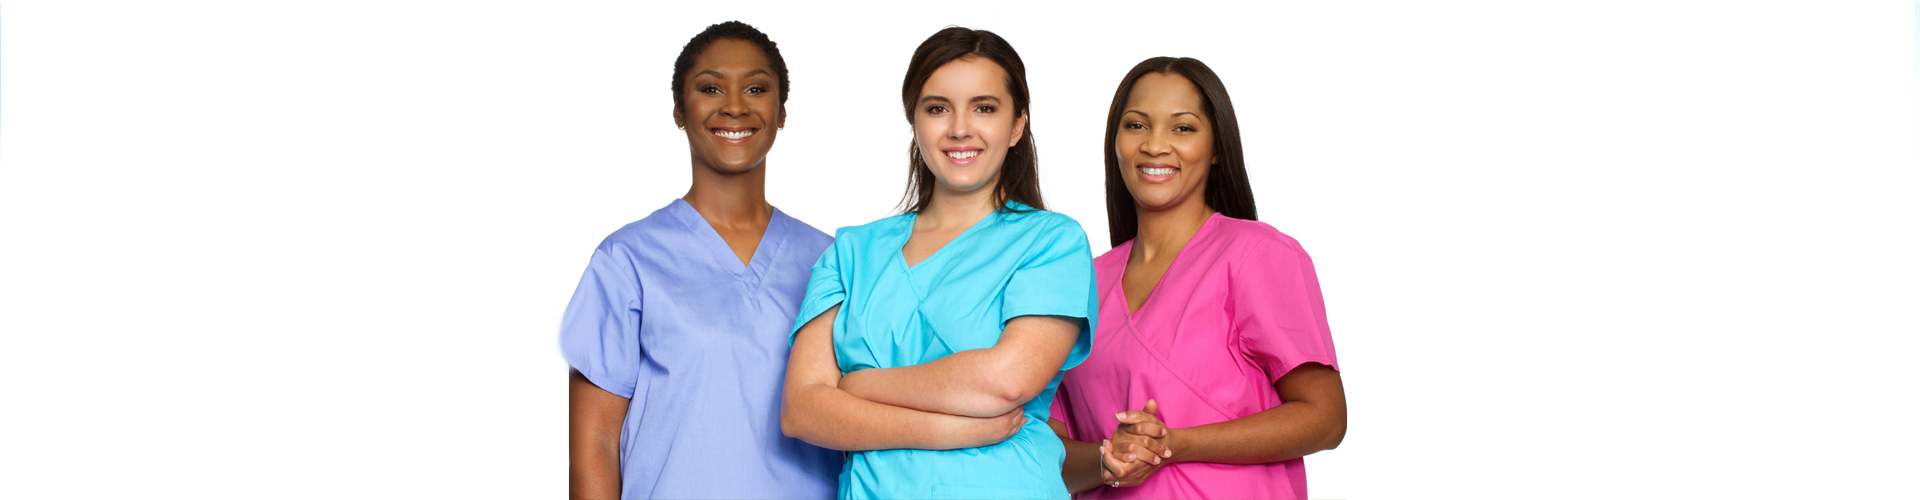 three healthcare workers smiling